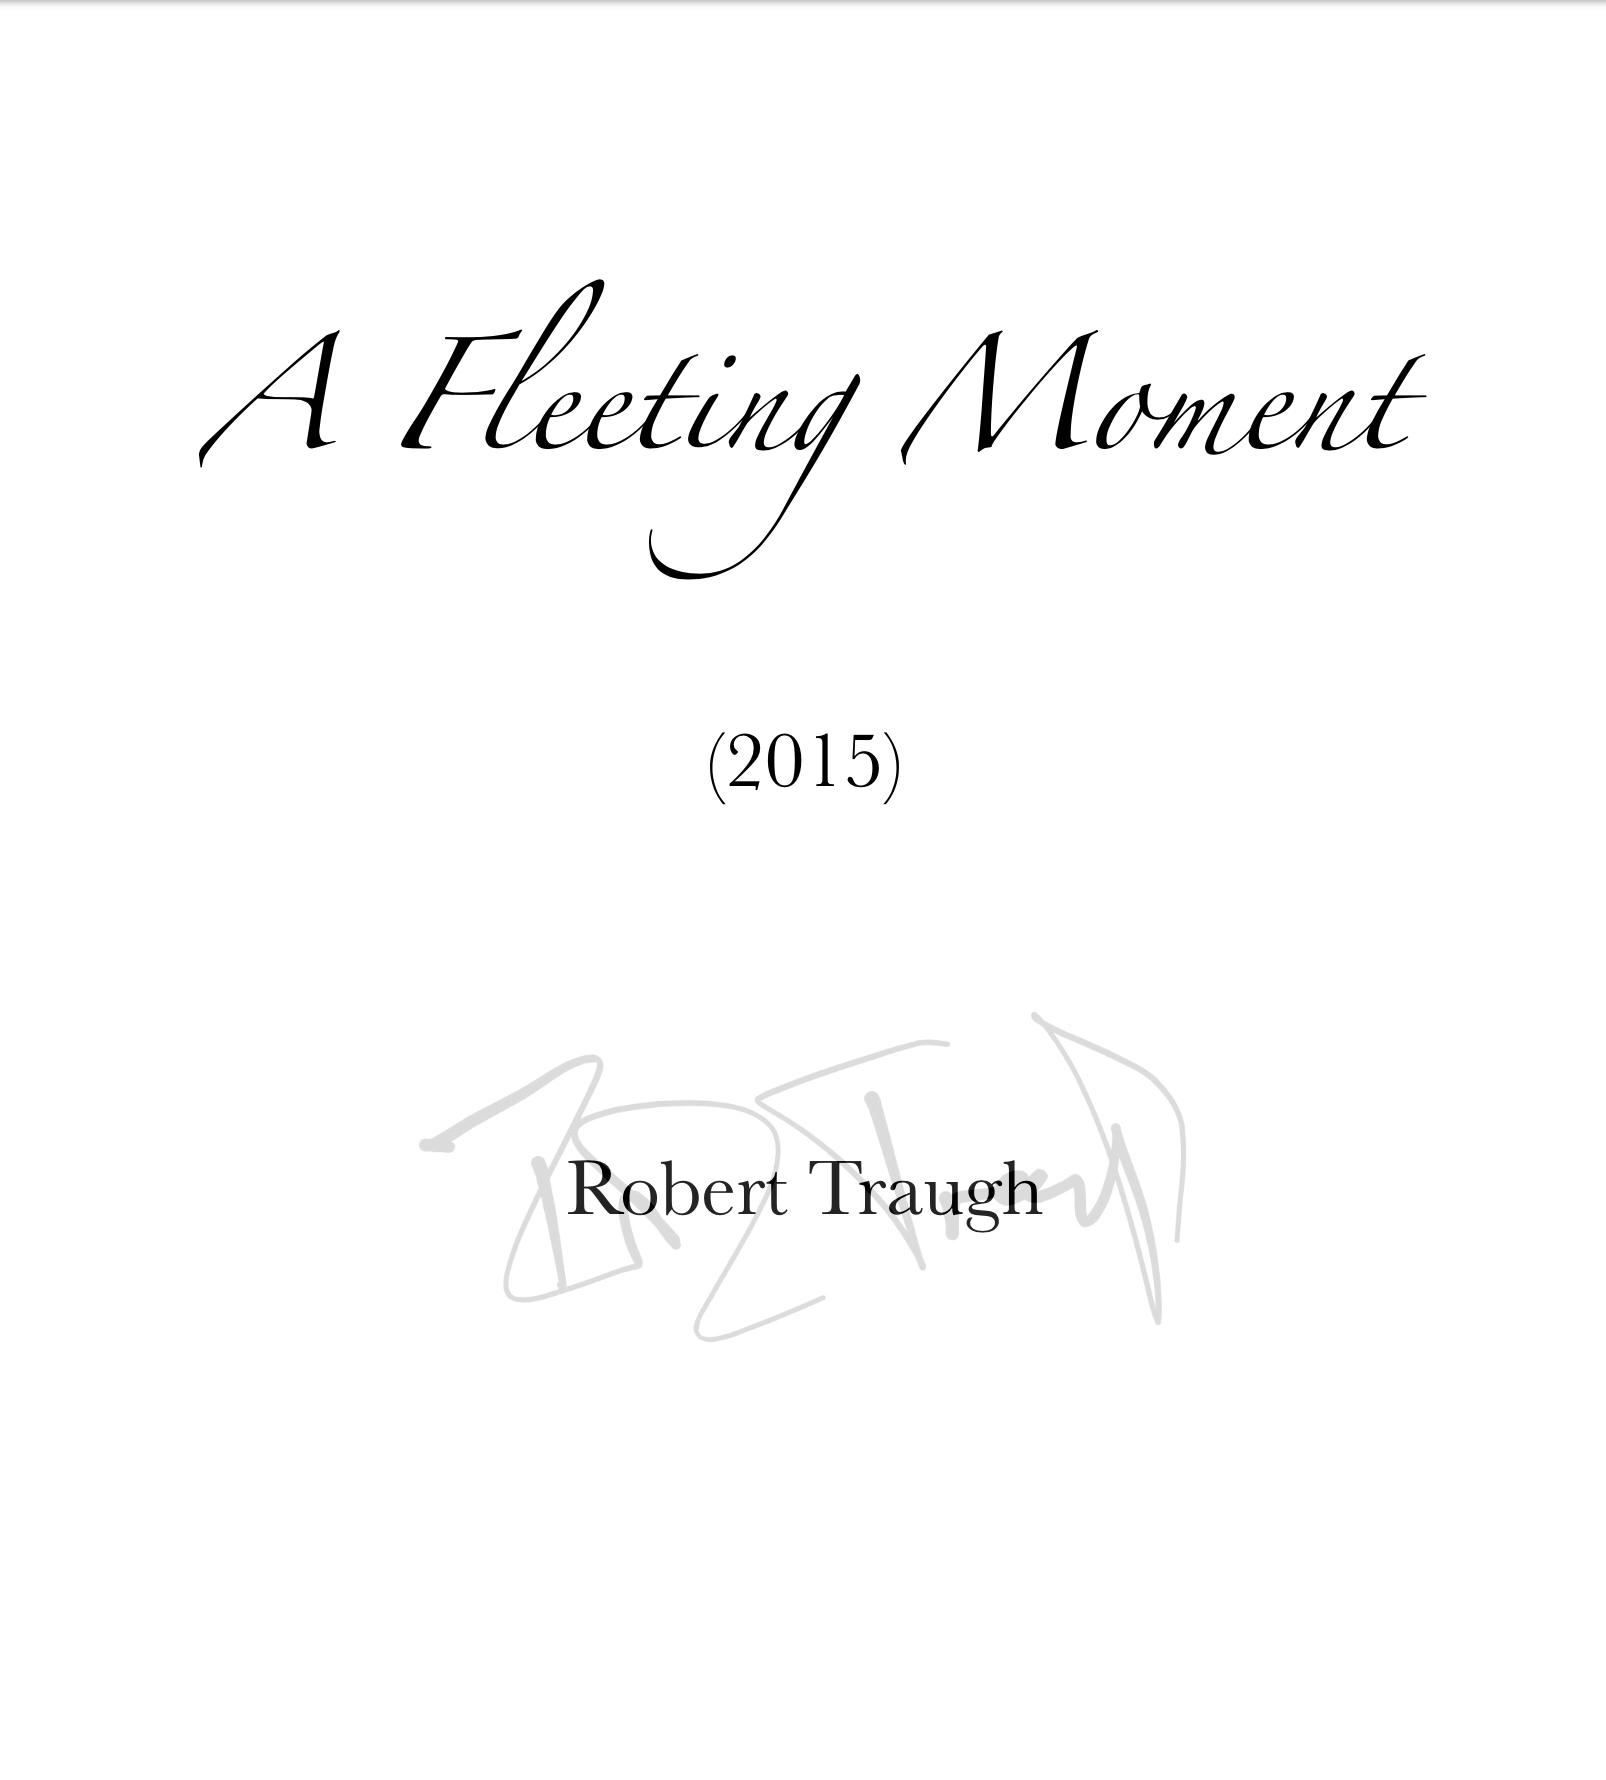 A Fleeting Moment by Rob Traugh